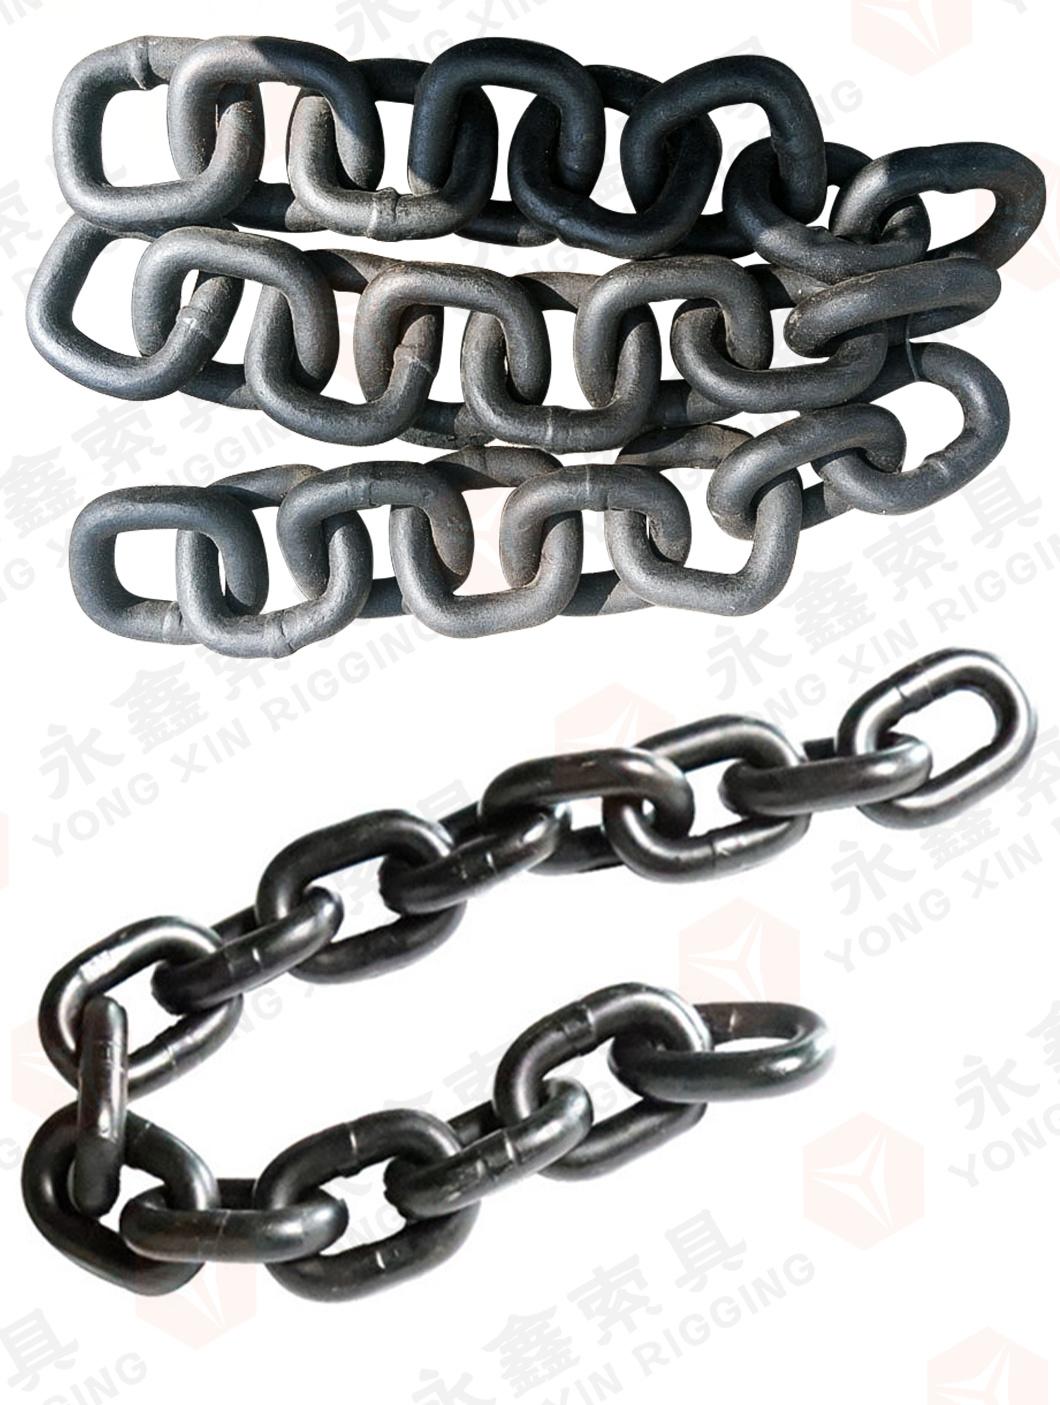 High Quality Polish Safe and Durable Material 20mn2 Lifting Lashing Chain for Load and Binding